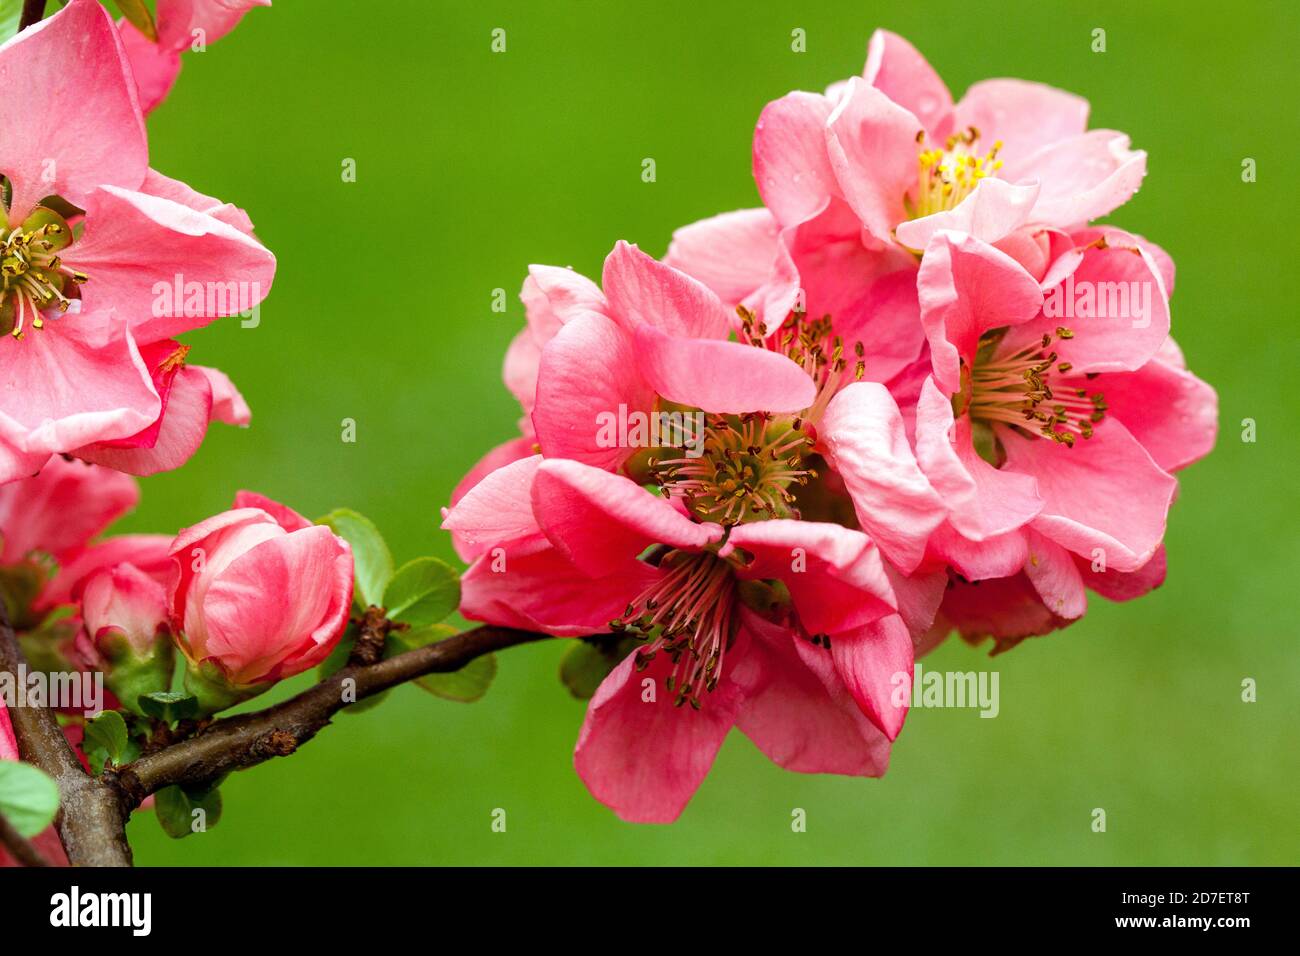 Chaenomeles Pink Lady Quince flowers Stock Photo